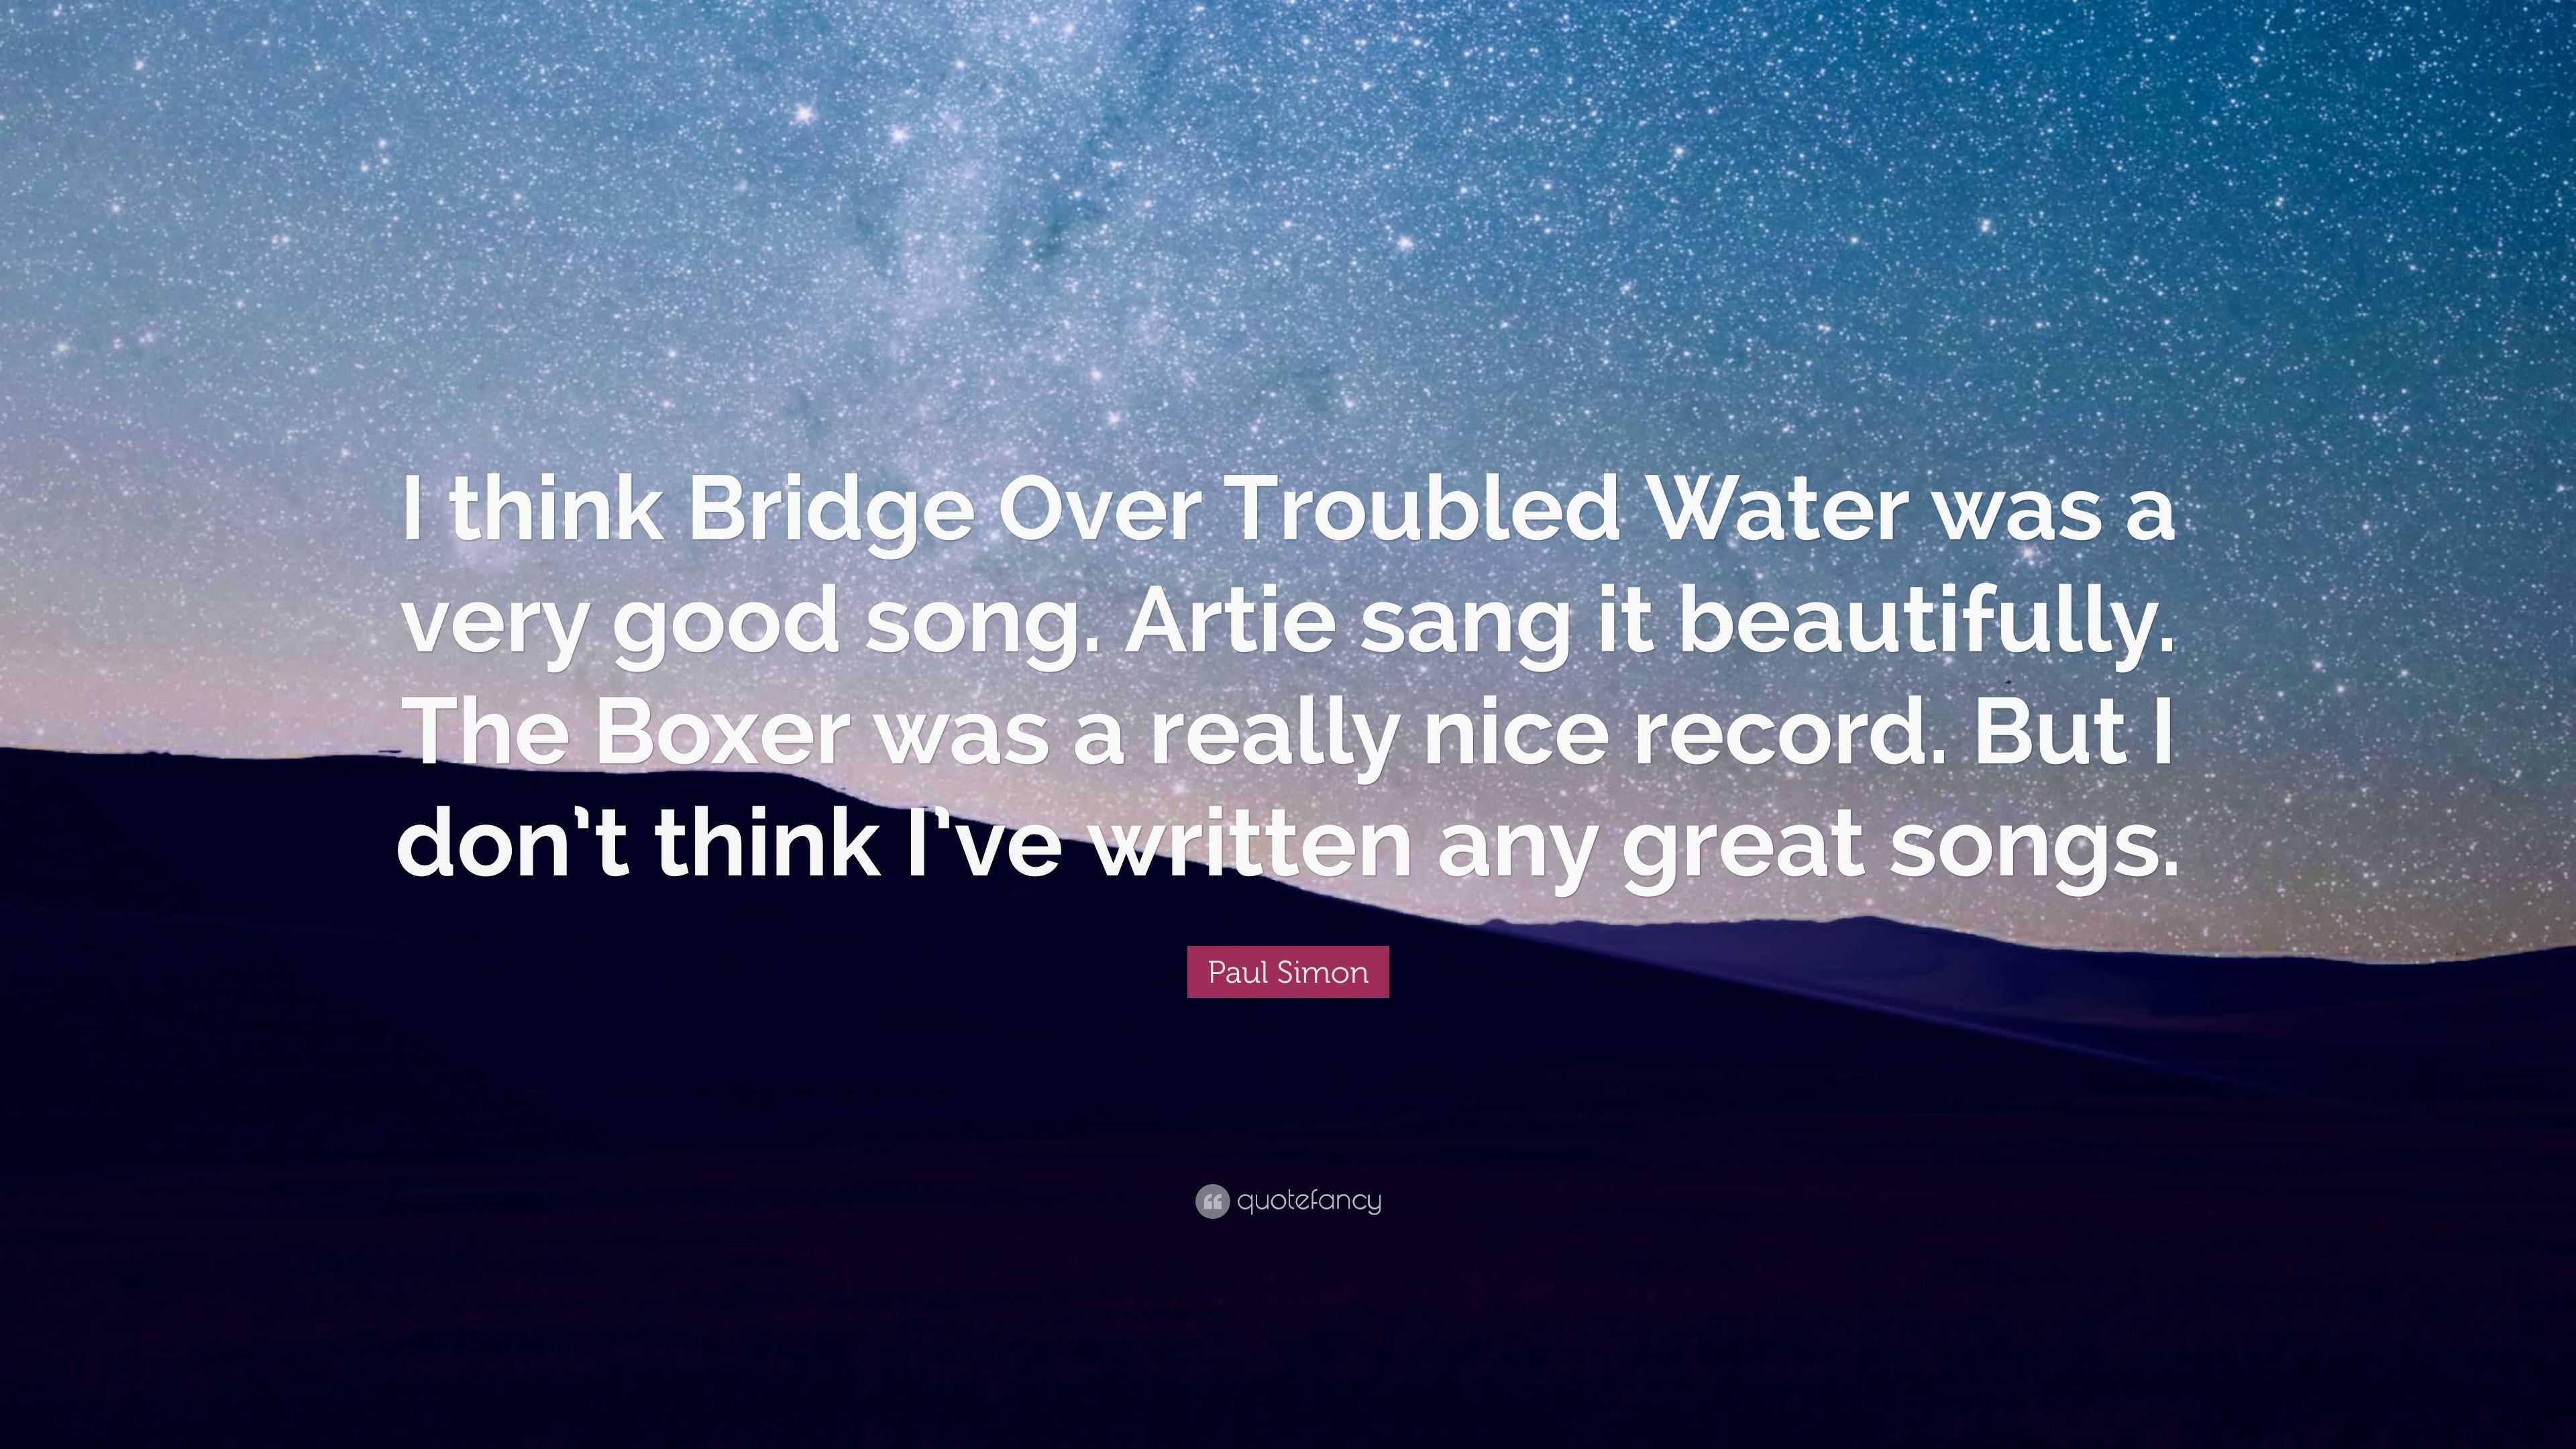 Paul Simon Quote: “I think Bridge Over Troubled Water was a very good song.  Artie sang it beautifully. The Boxer was a really nice record. ”